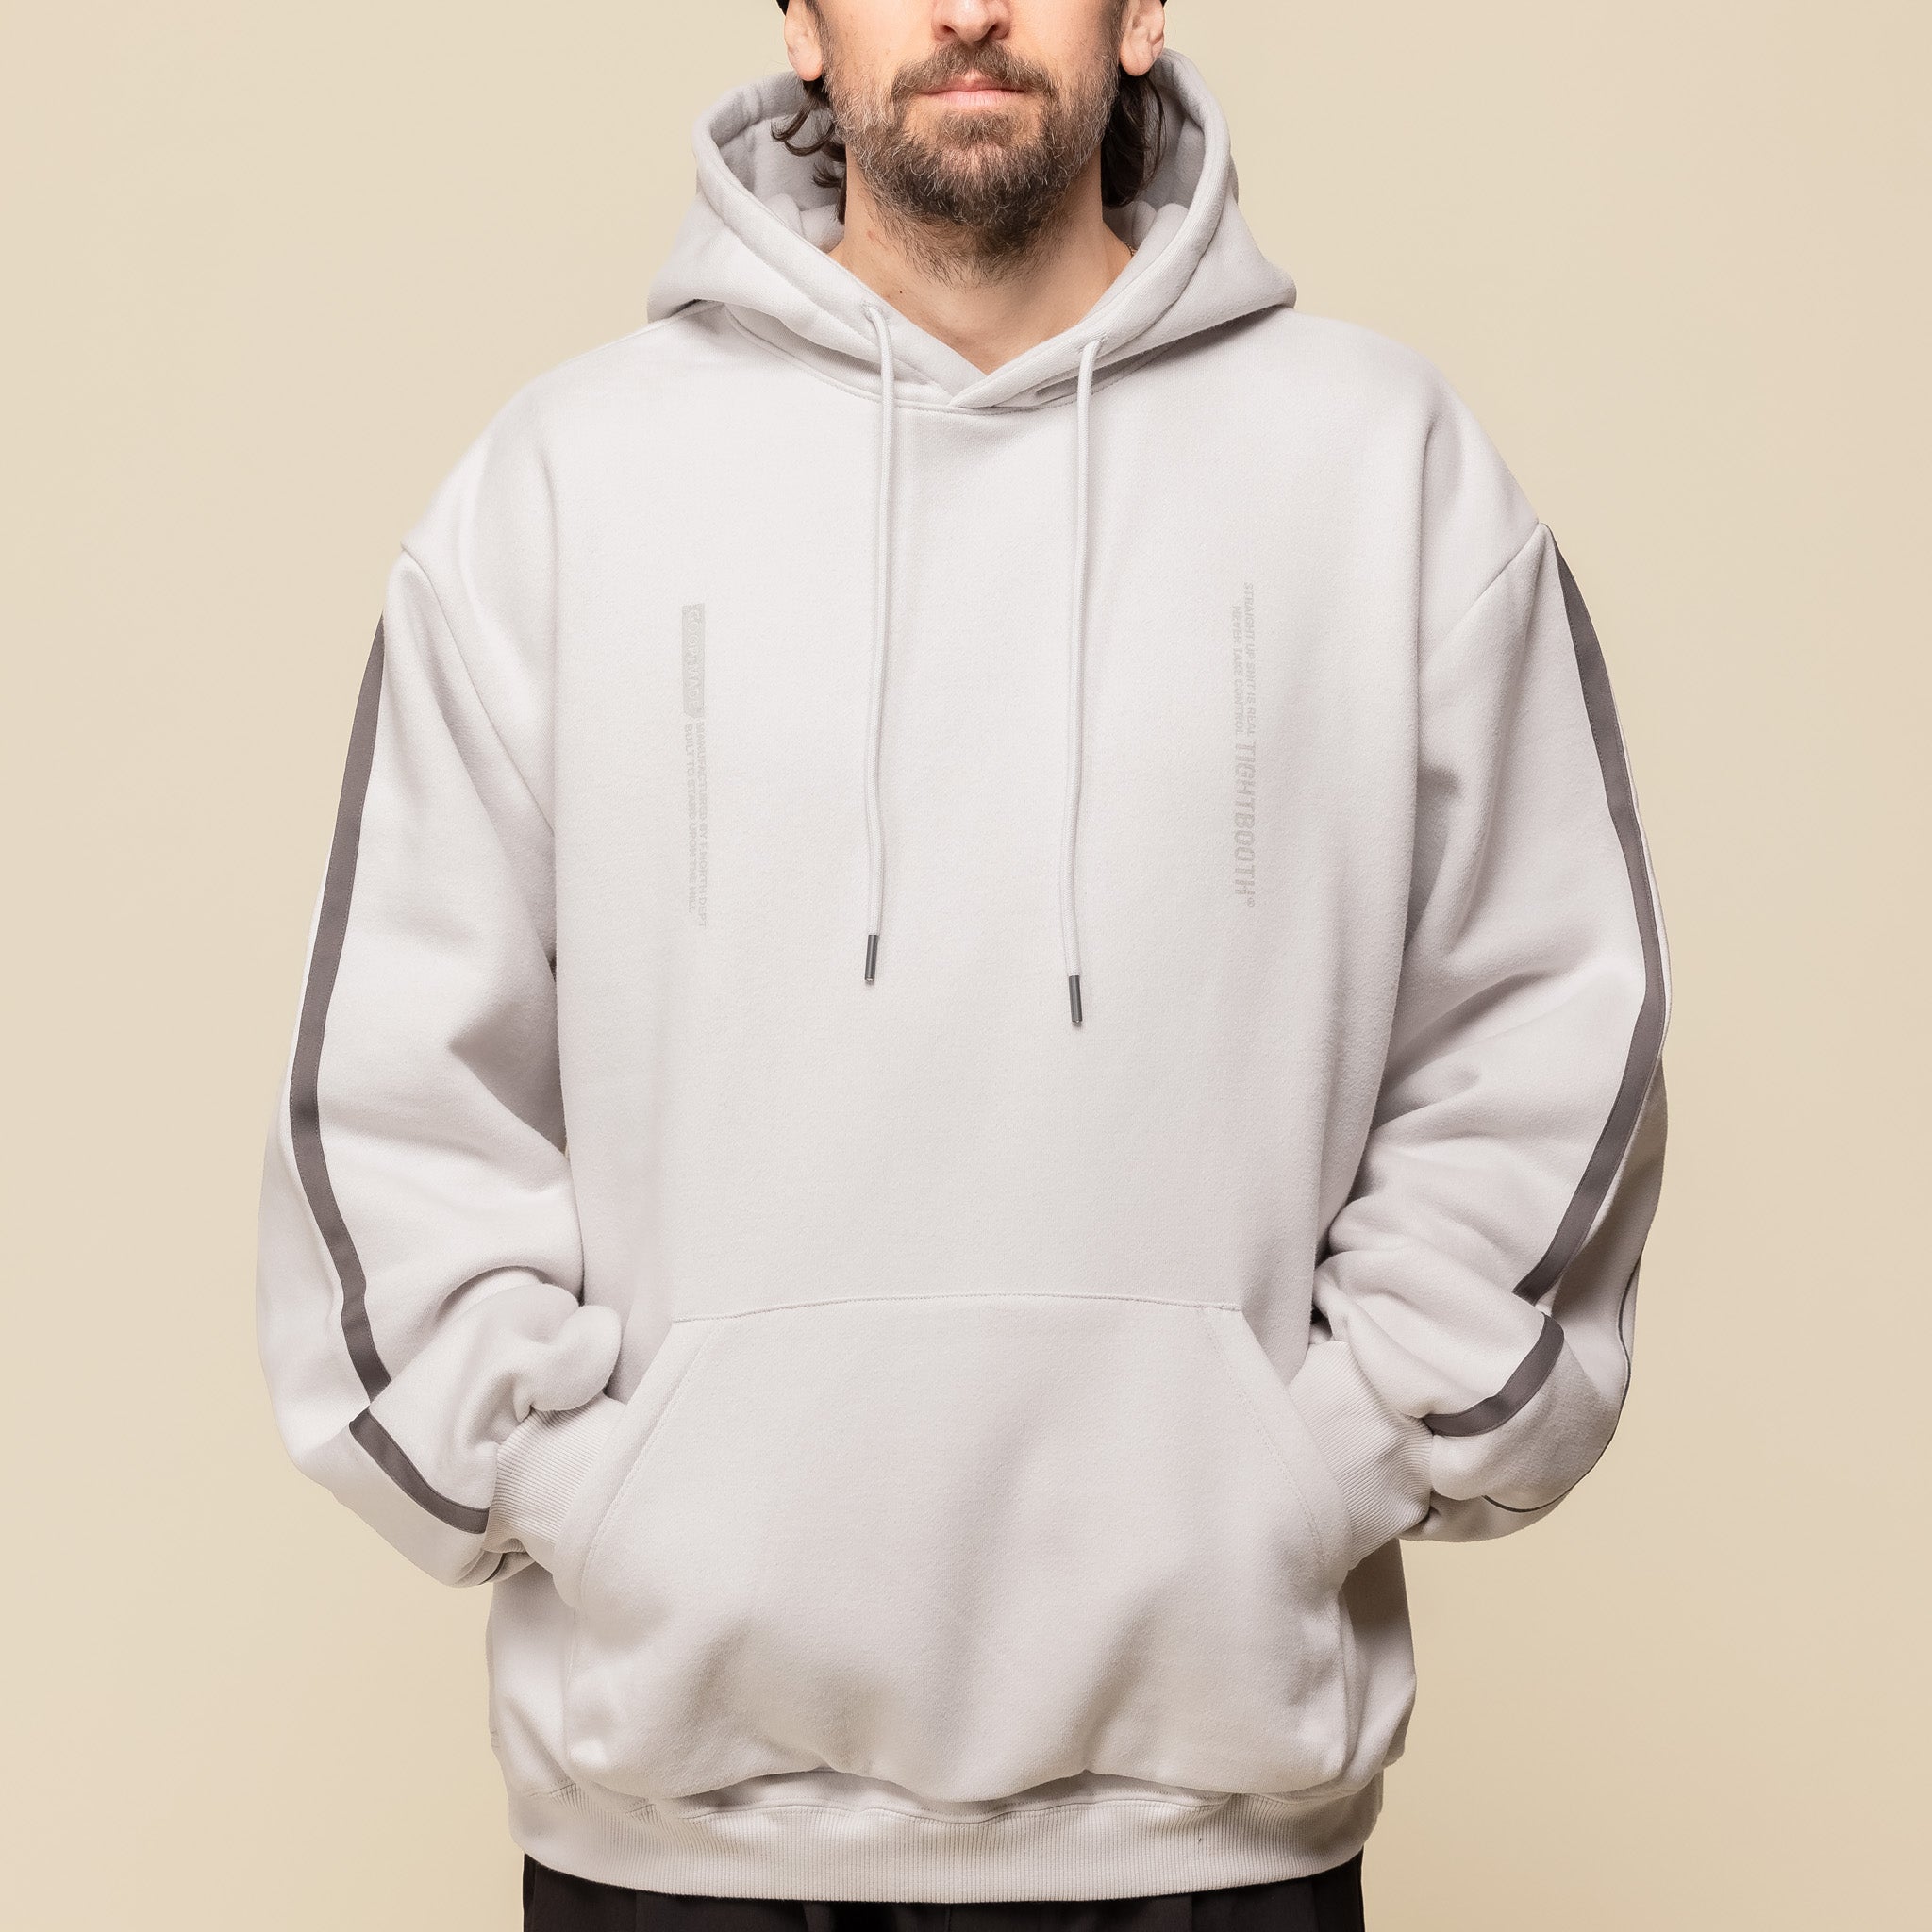 GOOPiMADE® x TIGHTBOOTH “GMT-01H” - Double Logo Hoodie - Grey "goopimade stockists" "goopimade sale" "goopi" "goopi pants" "goopi trousers"